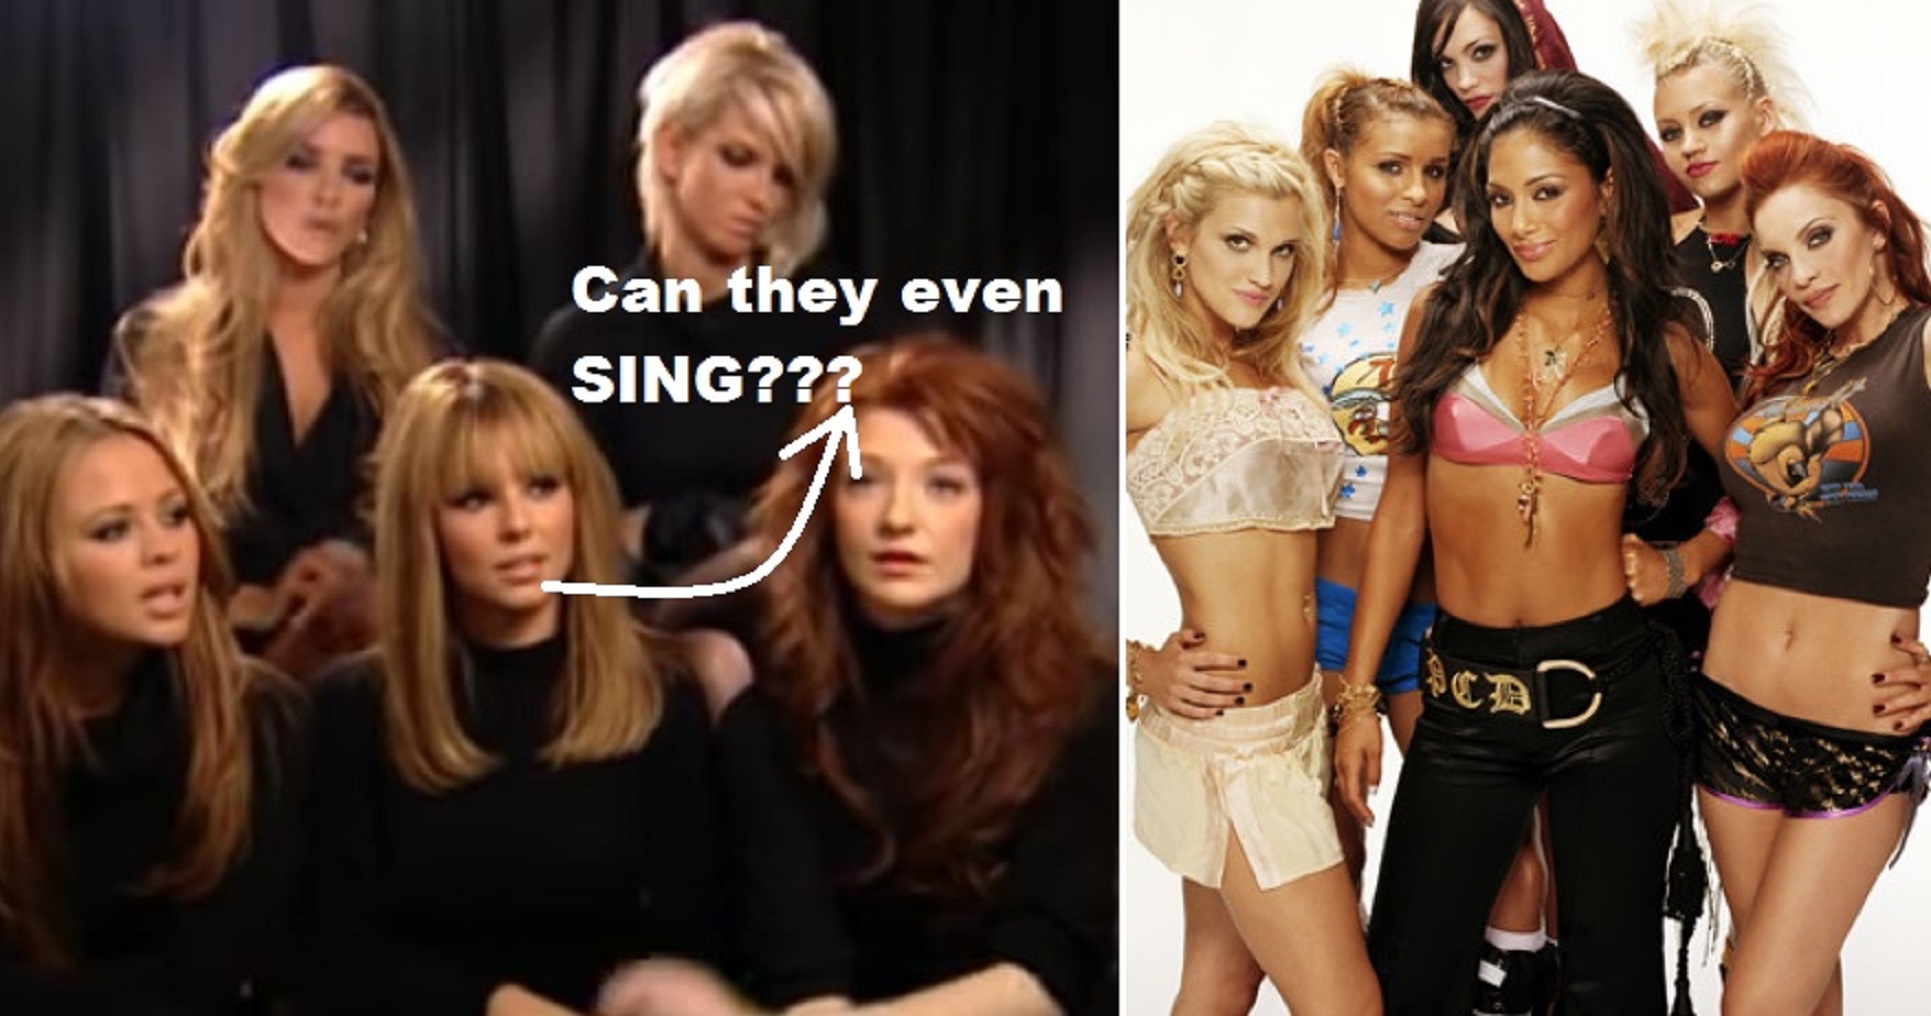 Throwback: When Cheryl Cole Slammed Nicole & Pussycat Dolls: ‘They Can’t Sing’